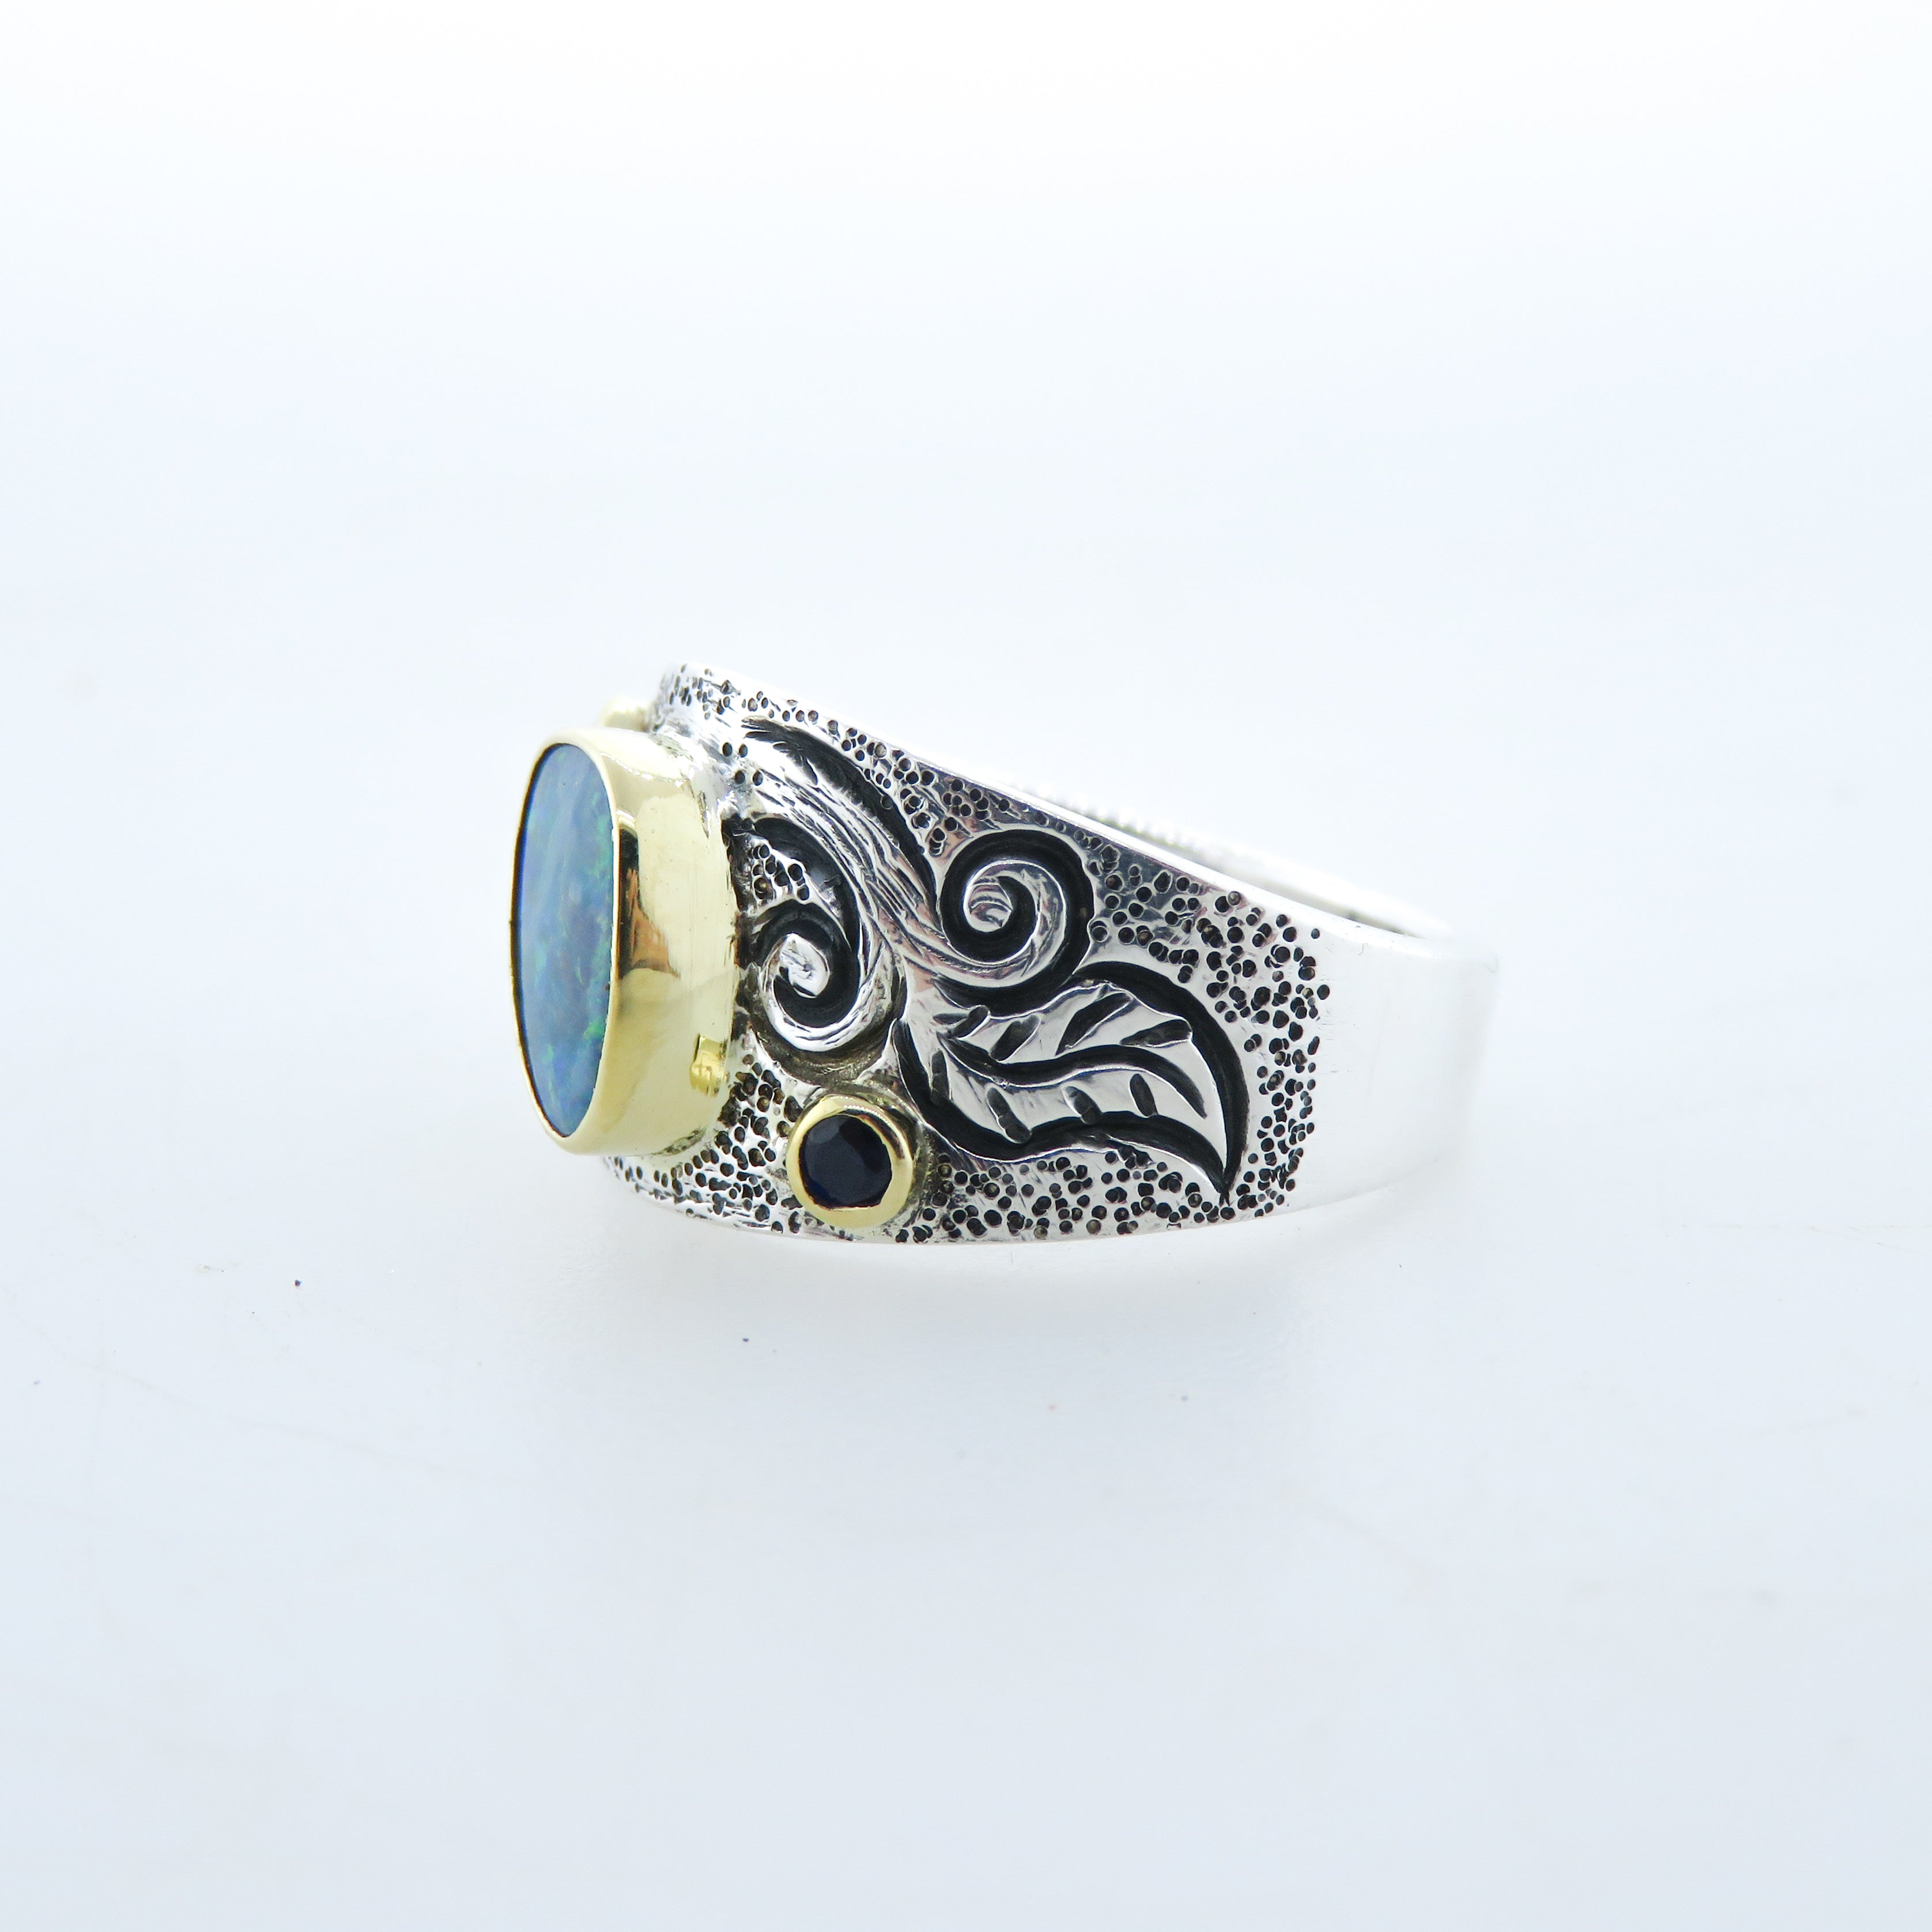 Australian Opal Sterling Silver Ring with Blue Sapphire and 18k Gold